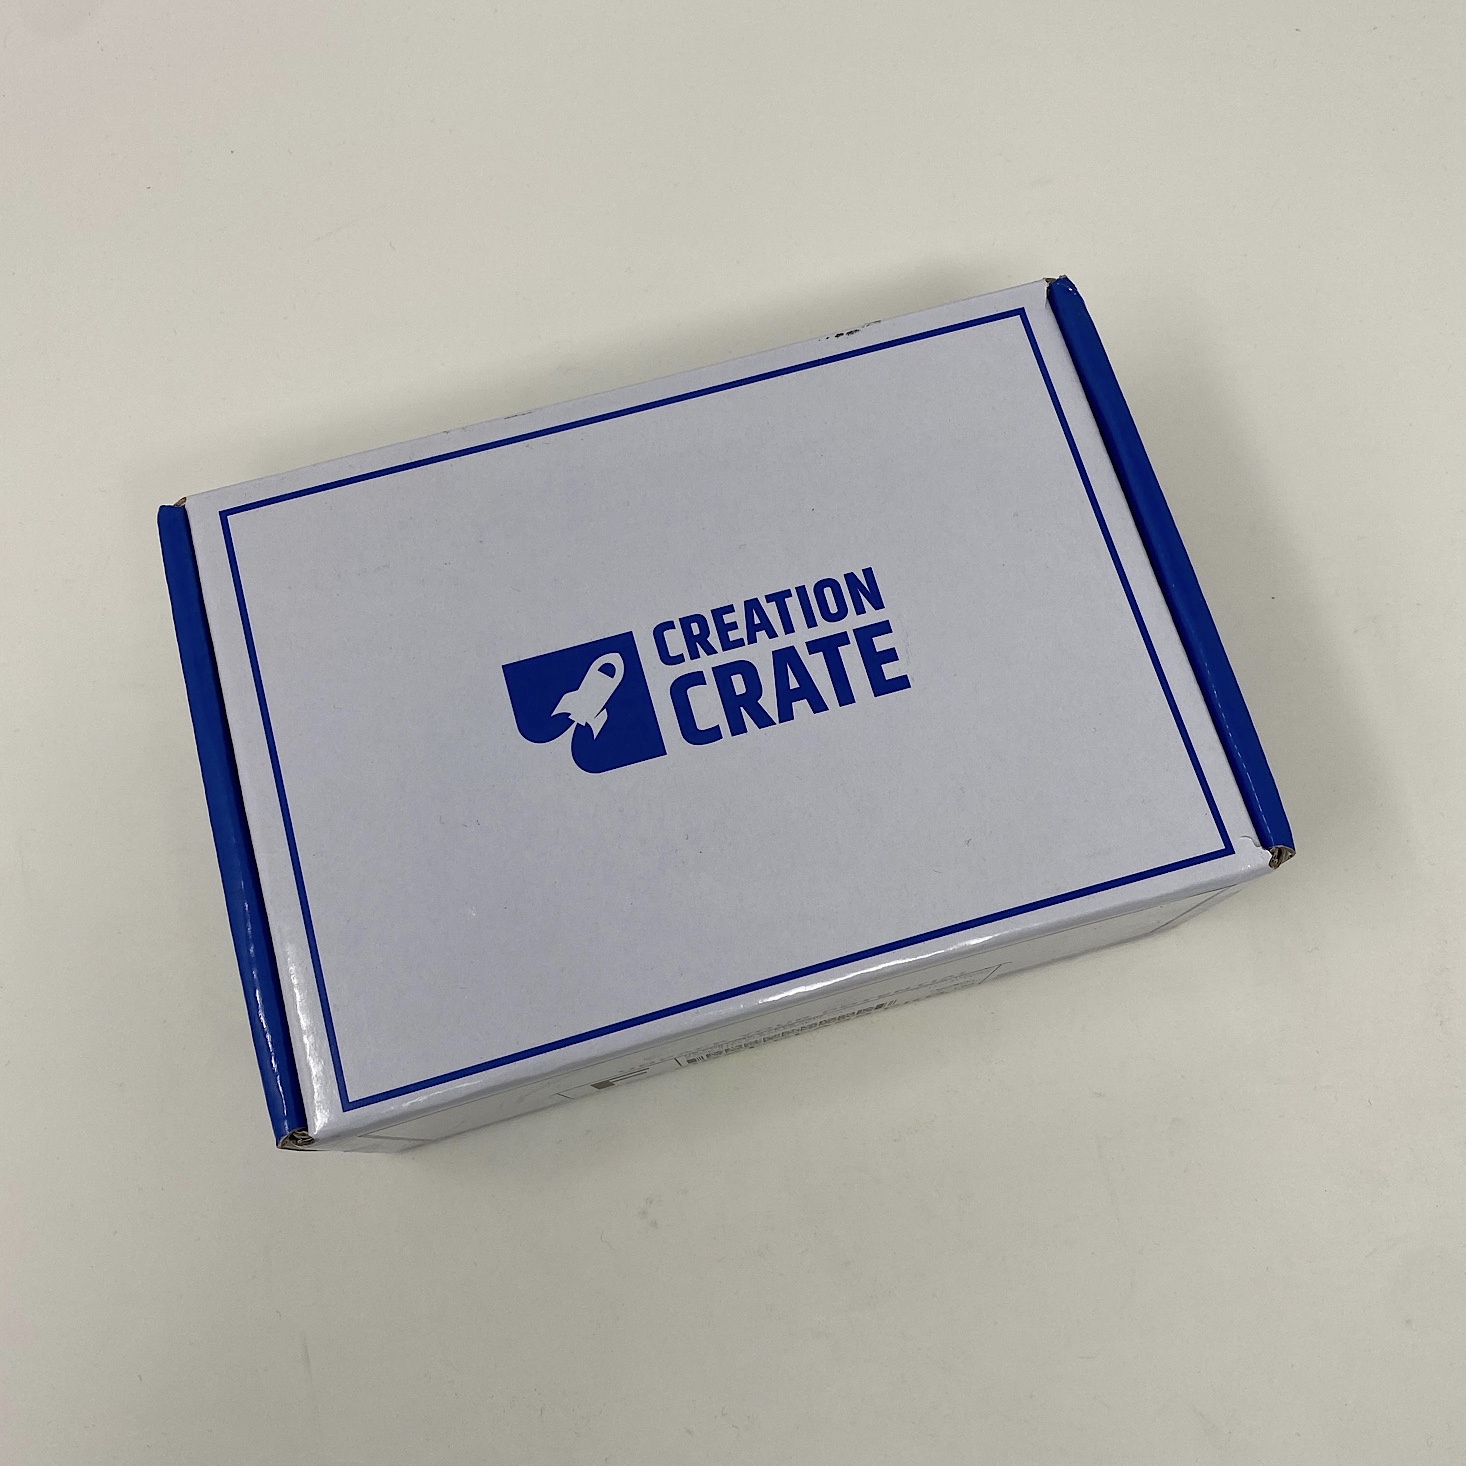 Creation Crate Review + Coupon – Project 10: Digital Multimeter